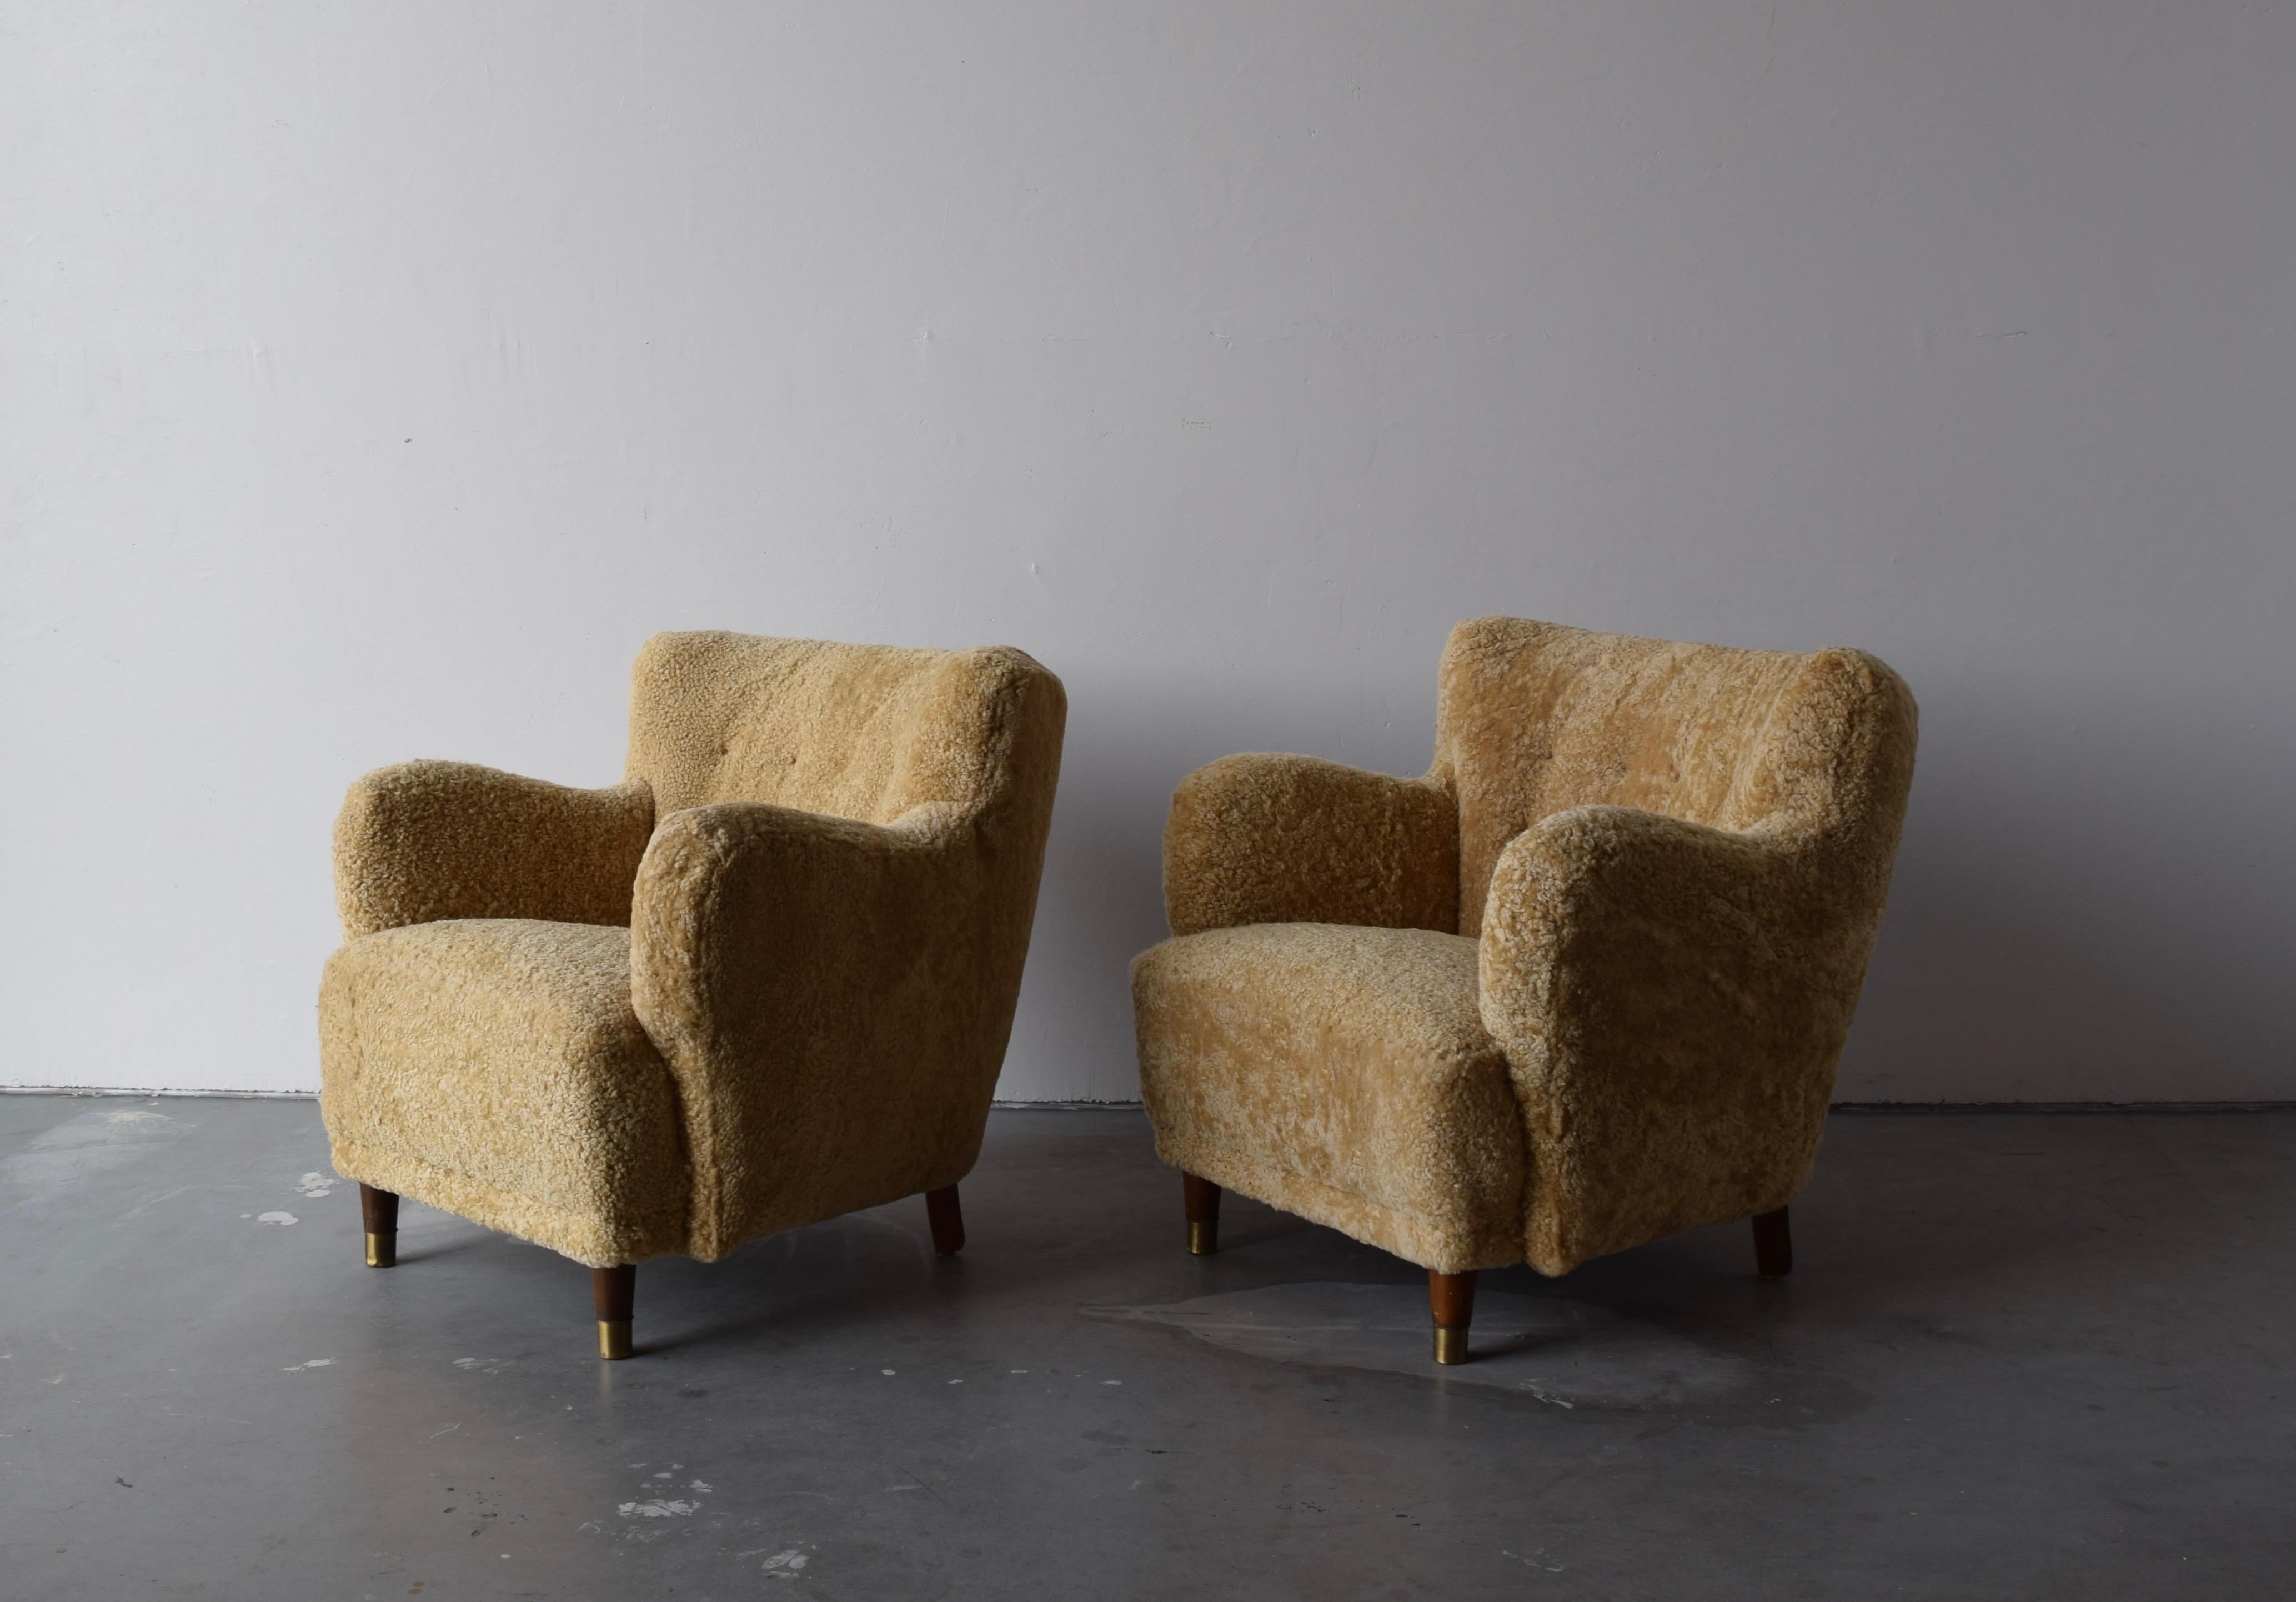 A pair of organic modernist lounge chairs. Designed and produced in Denmark, 1940s. Reupholstered in brand new authentic shearling upholstery. Dark stained wood, and brass caps to front legs. 

Similar in style to works by designers such as